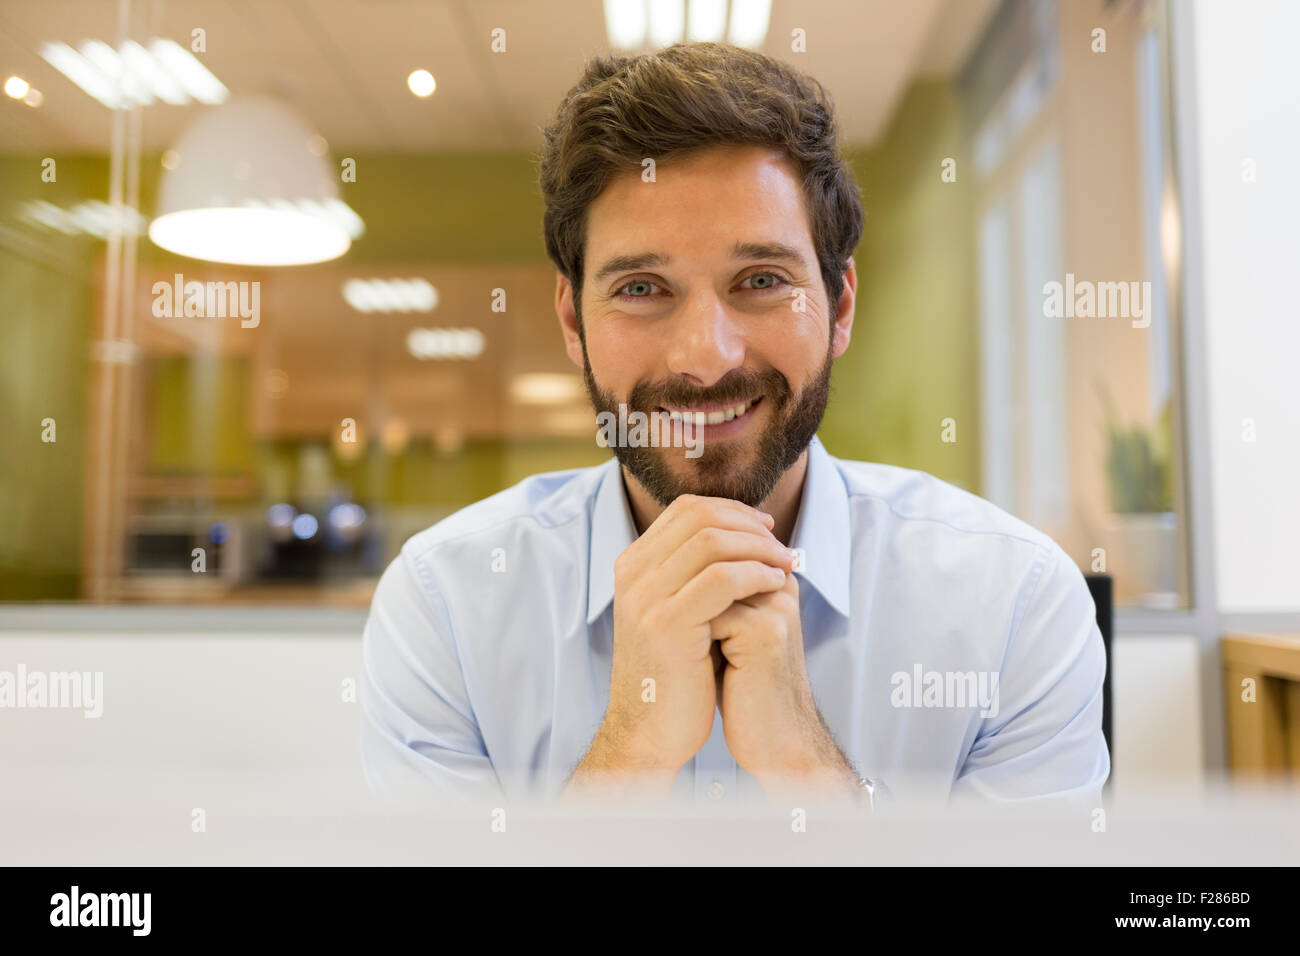 Portrait of confident bearded businessman in office with hands clasped Stock Photo